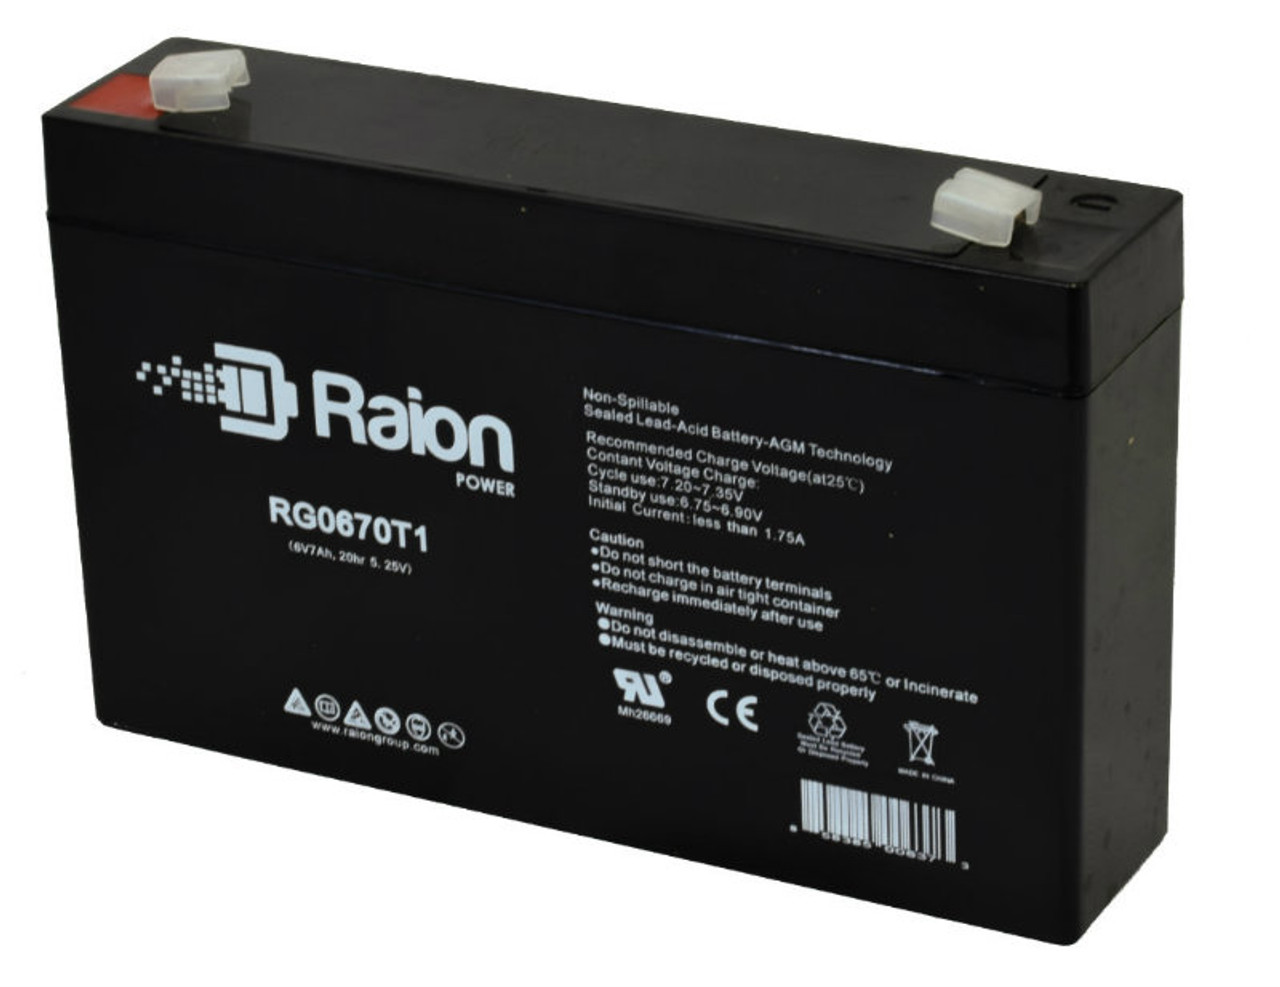 Raion Power RG0670T1 6V 7Ah Replacement Emergency Lighting Battery for National Power Corporation GS013P2